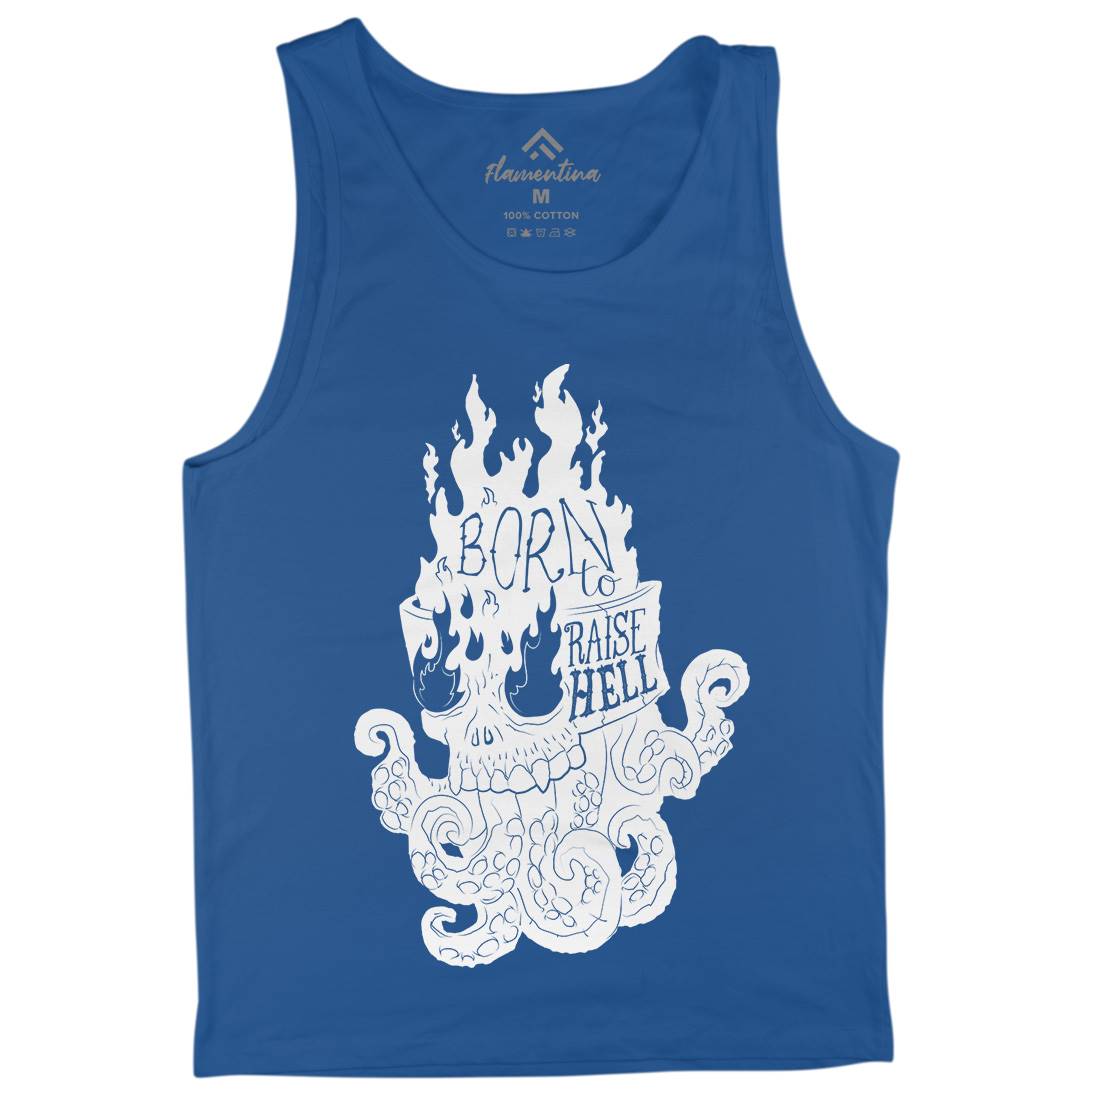 Raise Hell Mens Tank Top Vest Motorcycles A960